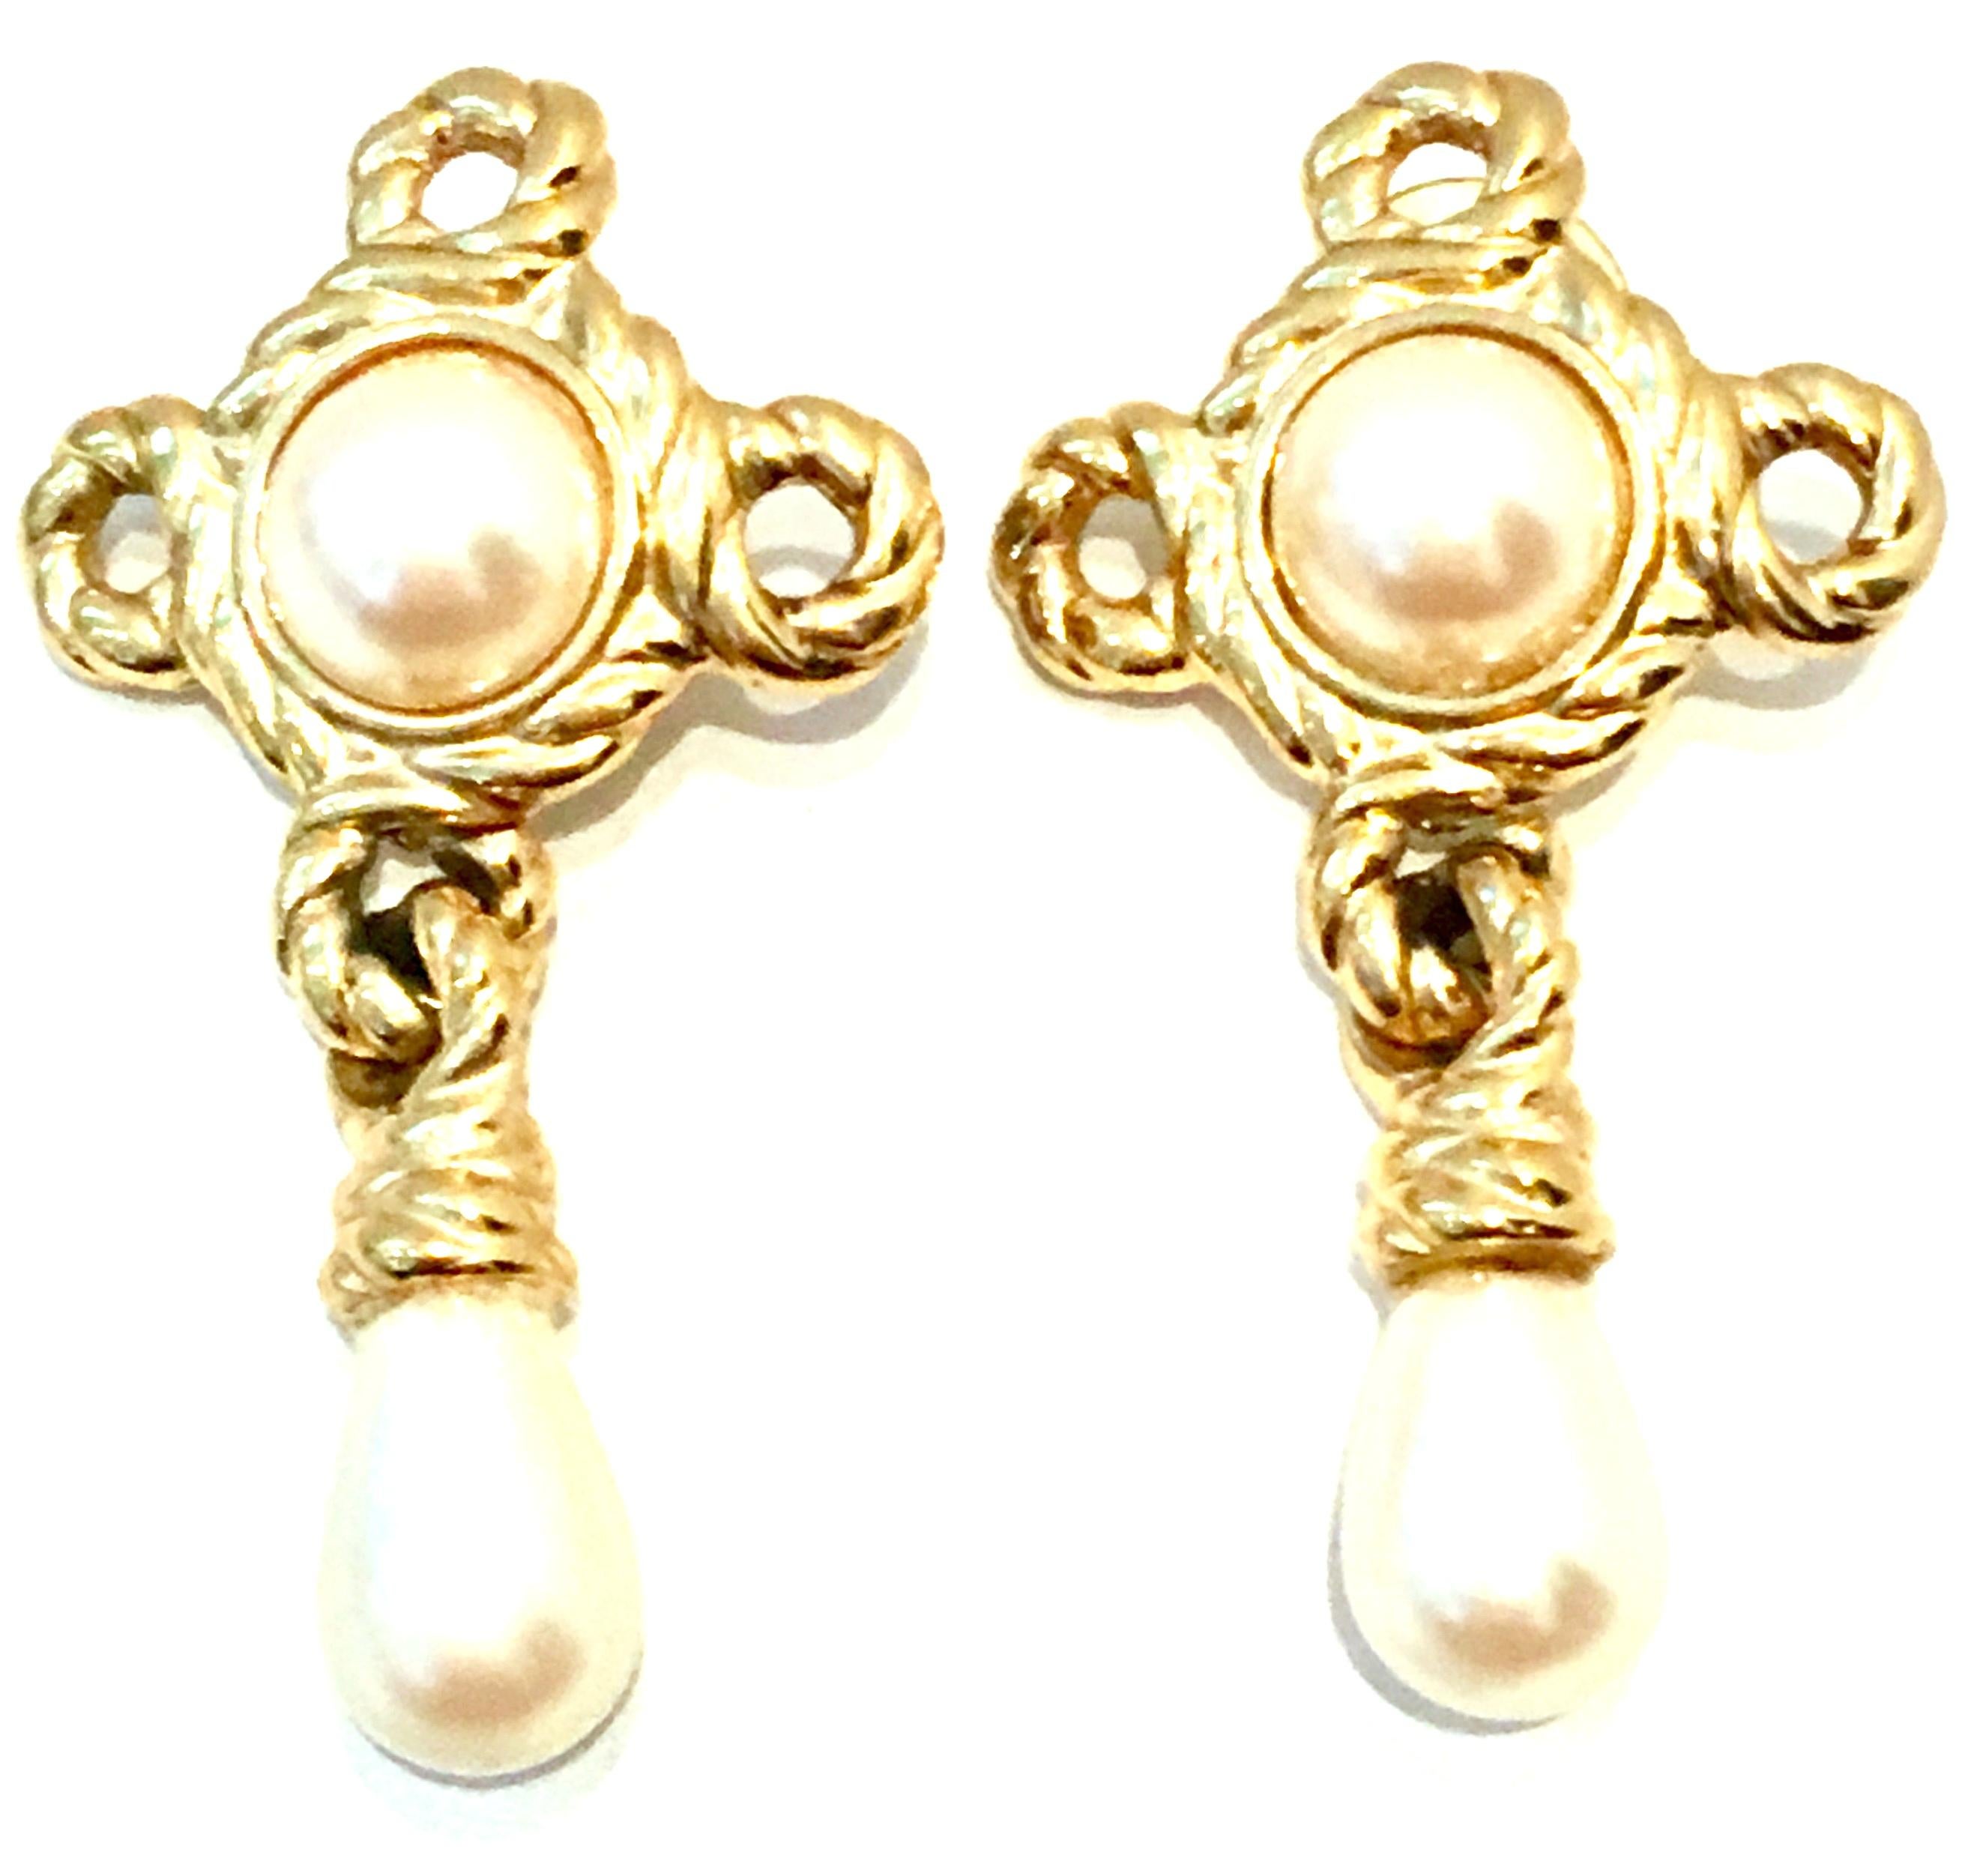 20th Century Givenchy Pair Of Gold Plate & Faux Pearl Drop Earrings. These finely crafted pierced style earrings feature gold plate with faux freshwater pearl stones. The teardrop shape pearl stone measures approximately, .5